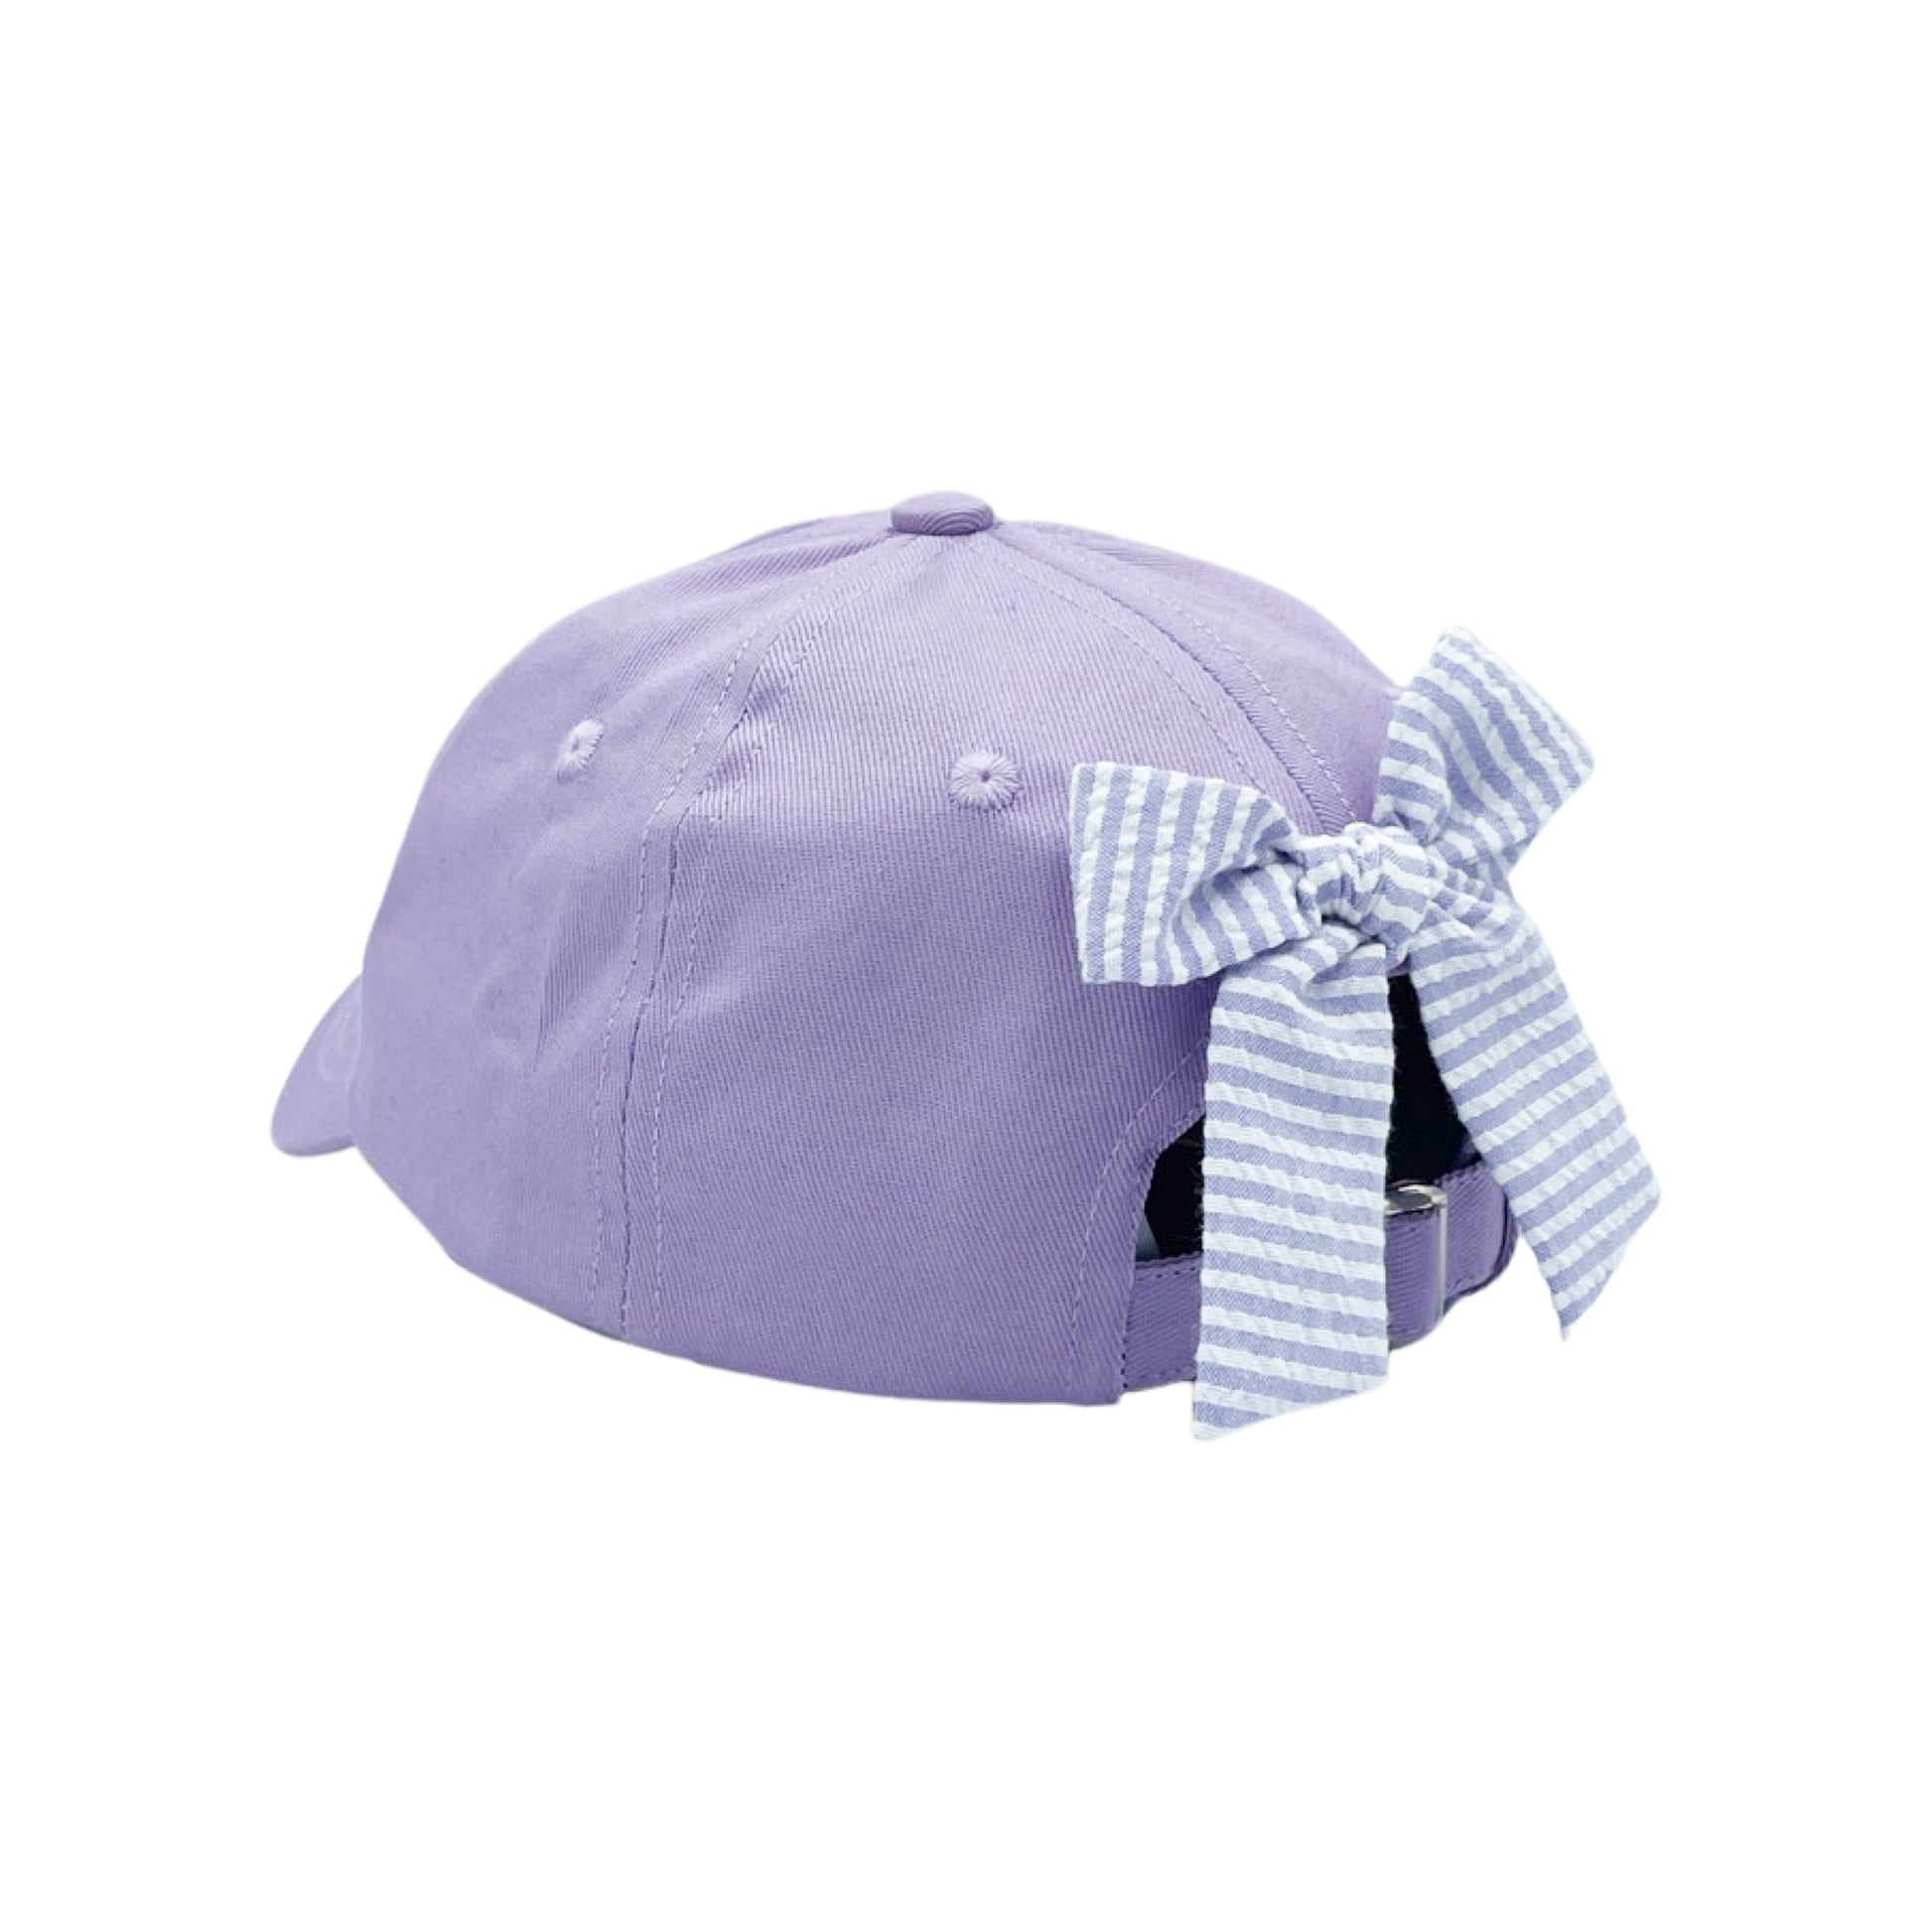 Bow Baseball Lilly & | in Lavender Bows Bits (Women) Hat